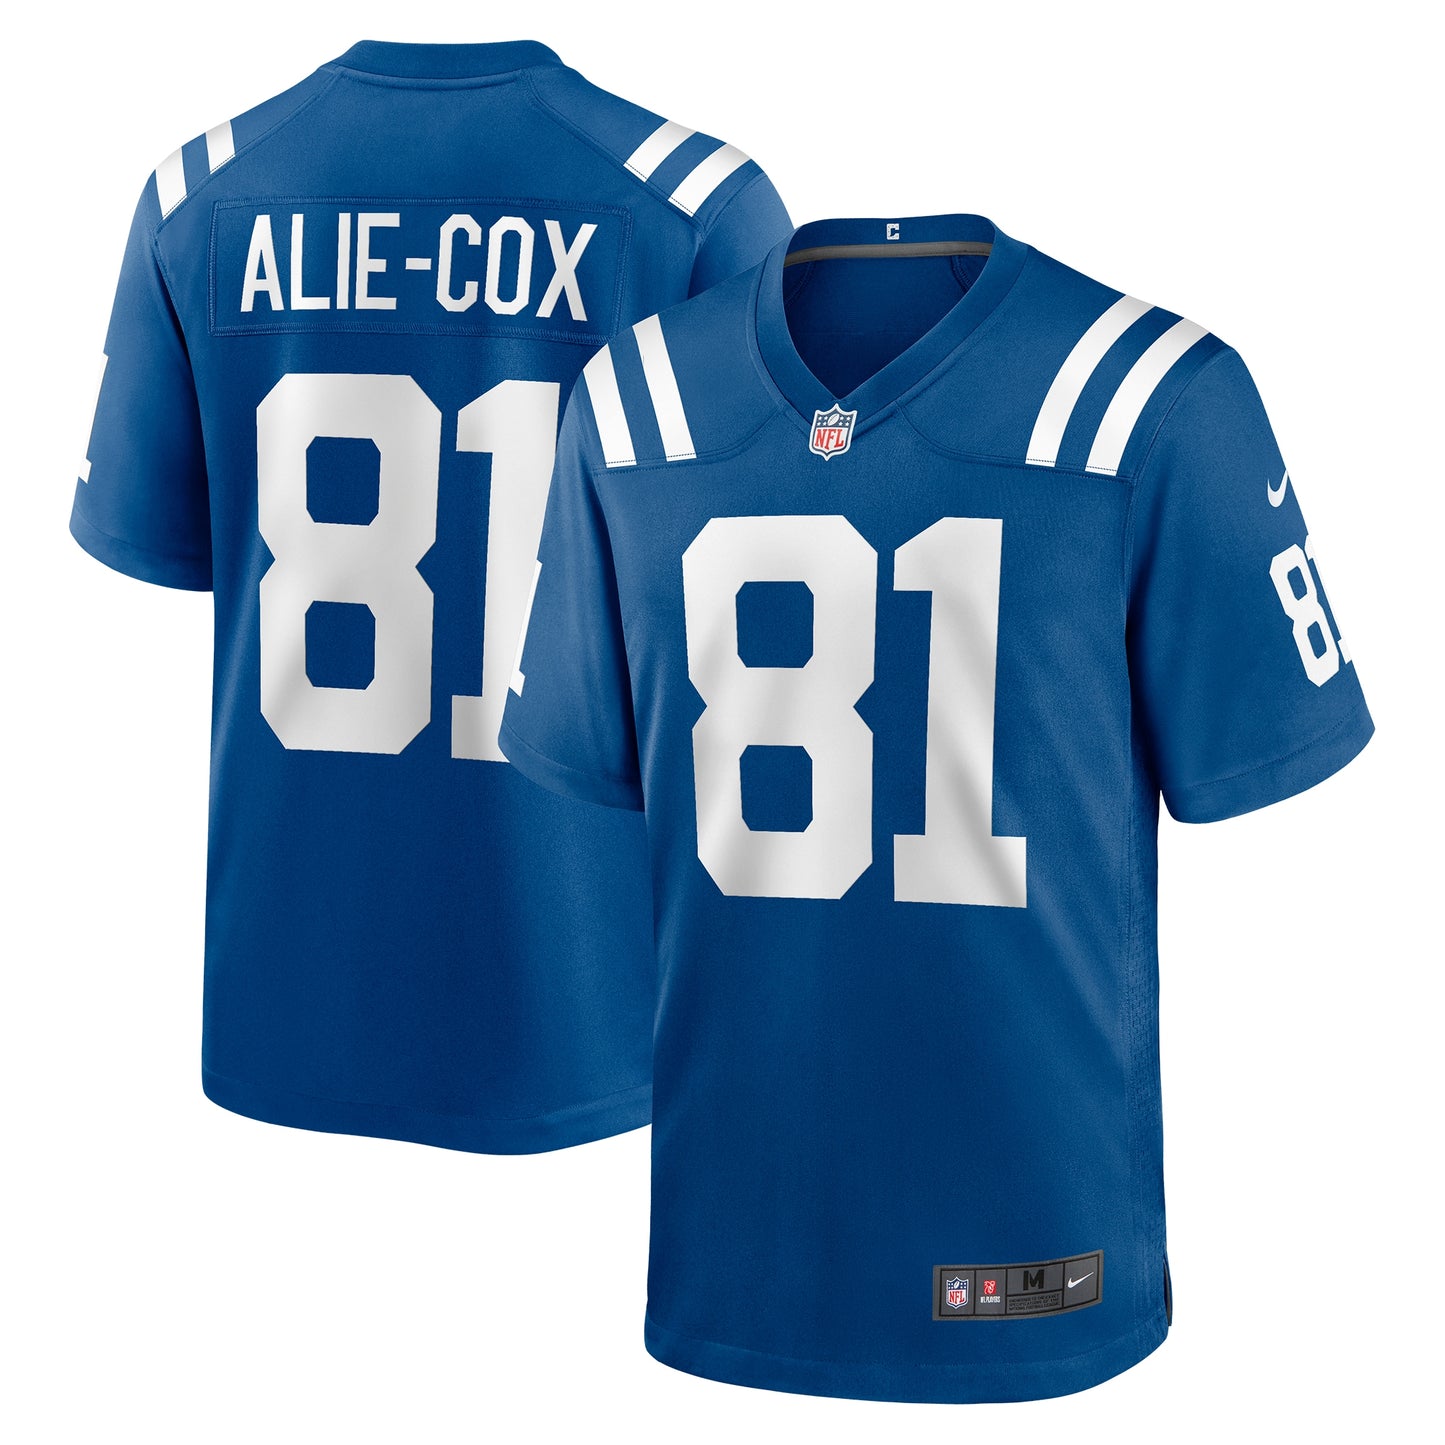 Mo Alie-Cox Indianapolis Colts Nike Team Game Jersey - Royal